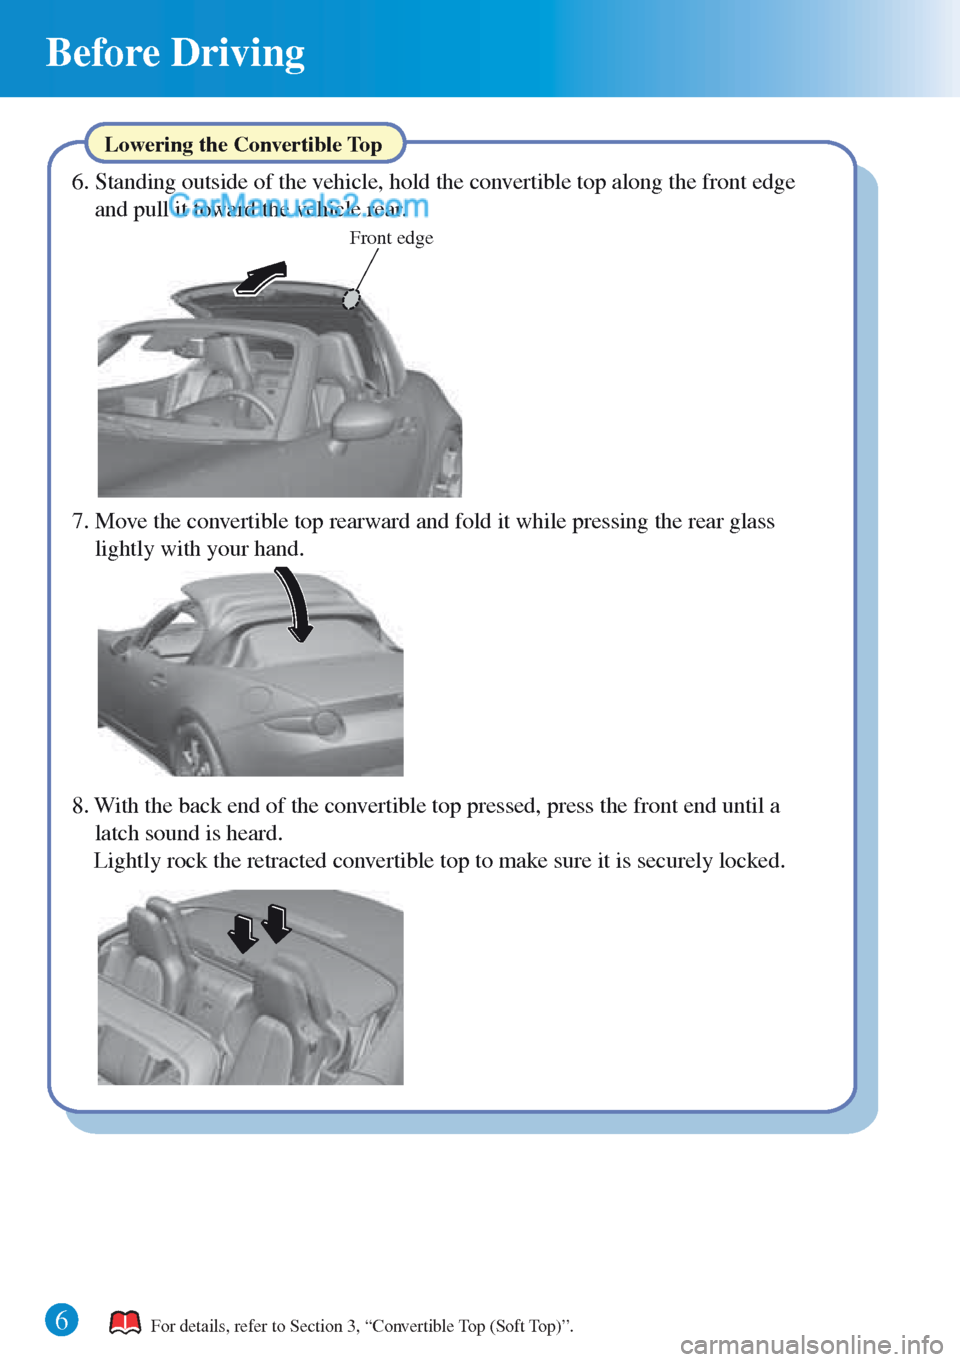 MAZDA MODEL MX-5 2015  Quick Guide (in English) Front edge 
Before Driving 
6 
Lowering the Convertible Top 
6. Standing outside of the vehicle, hold the convertible top along the front edge 
and pull it toward the vehicle rear. 
7. Move the conver